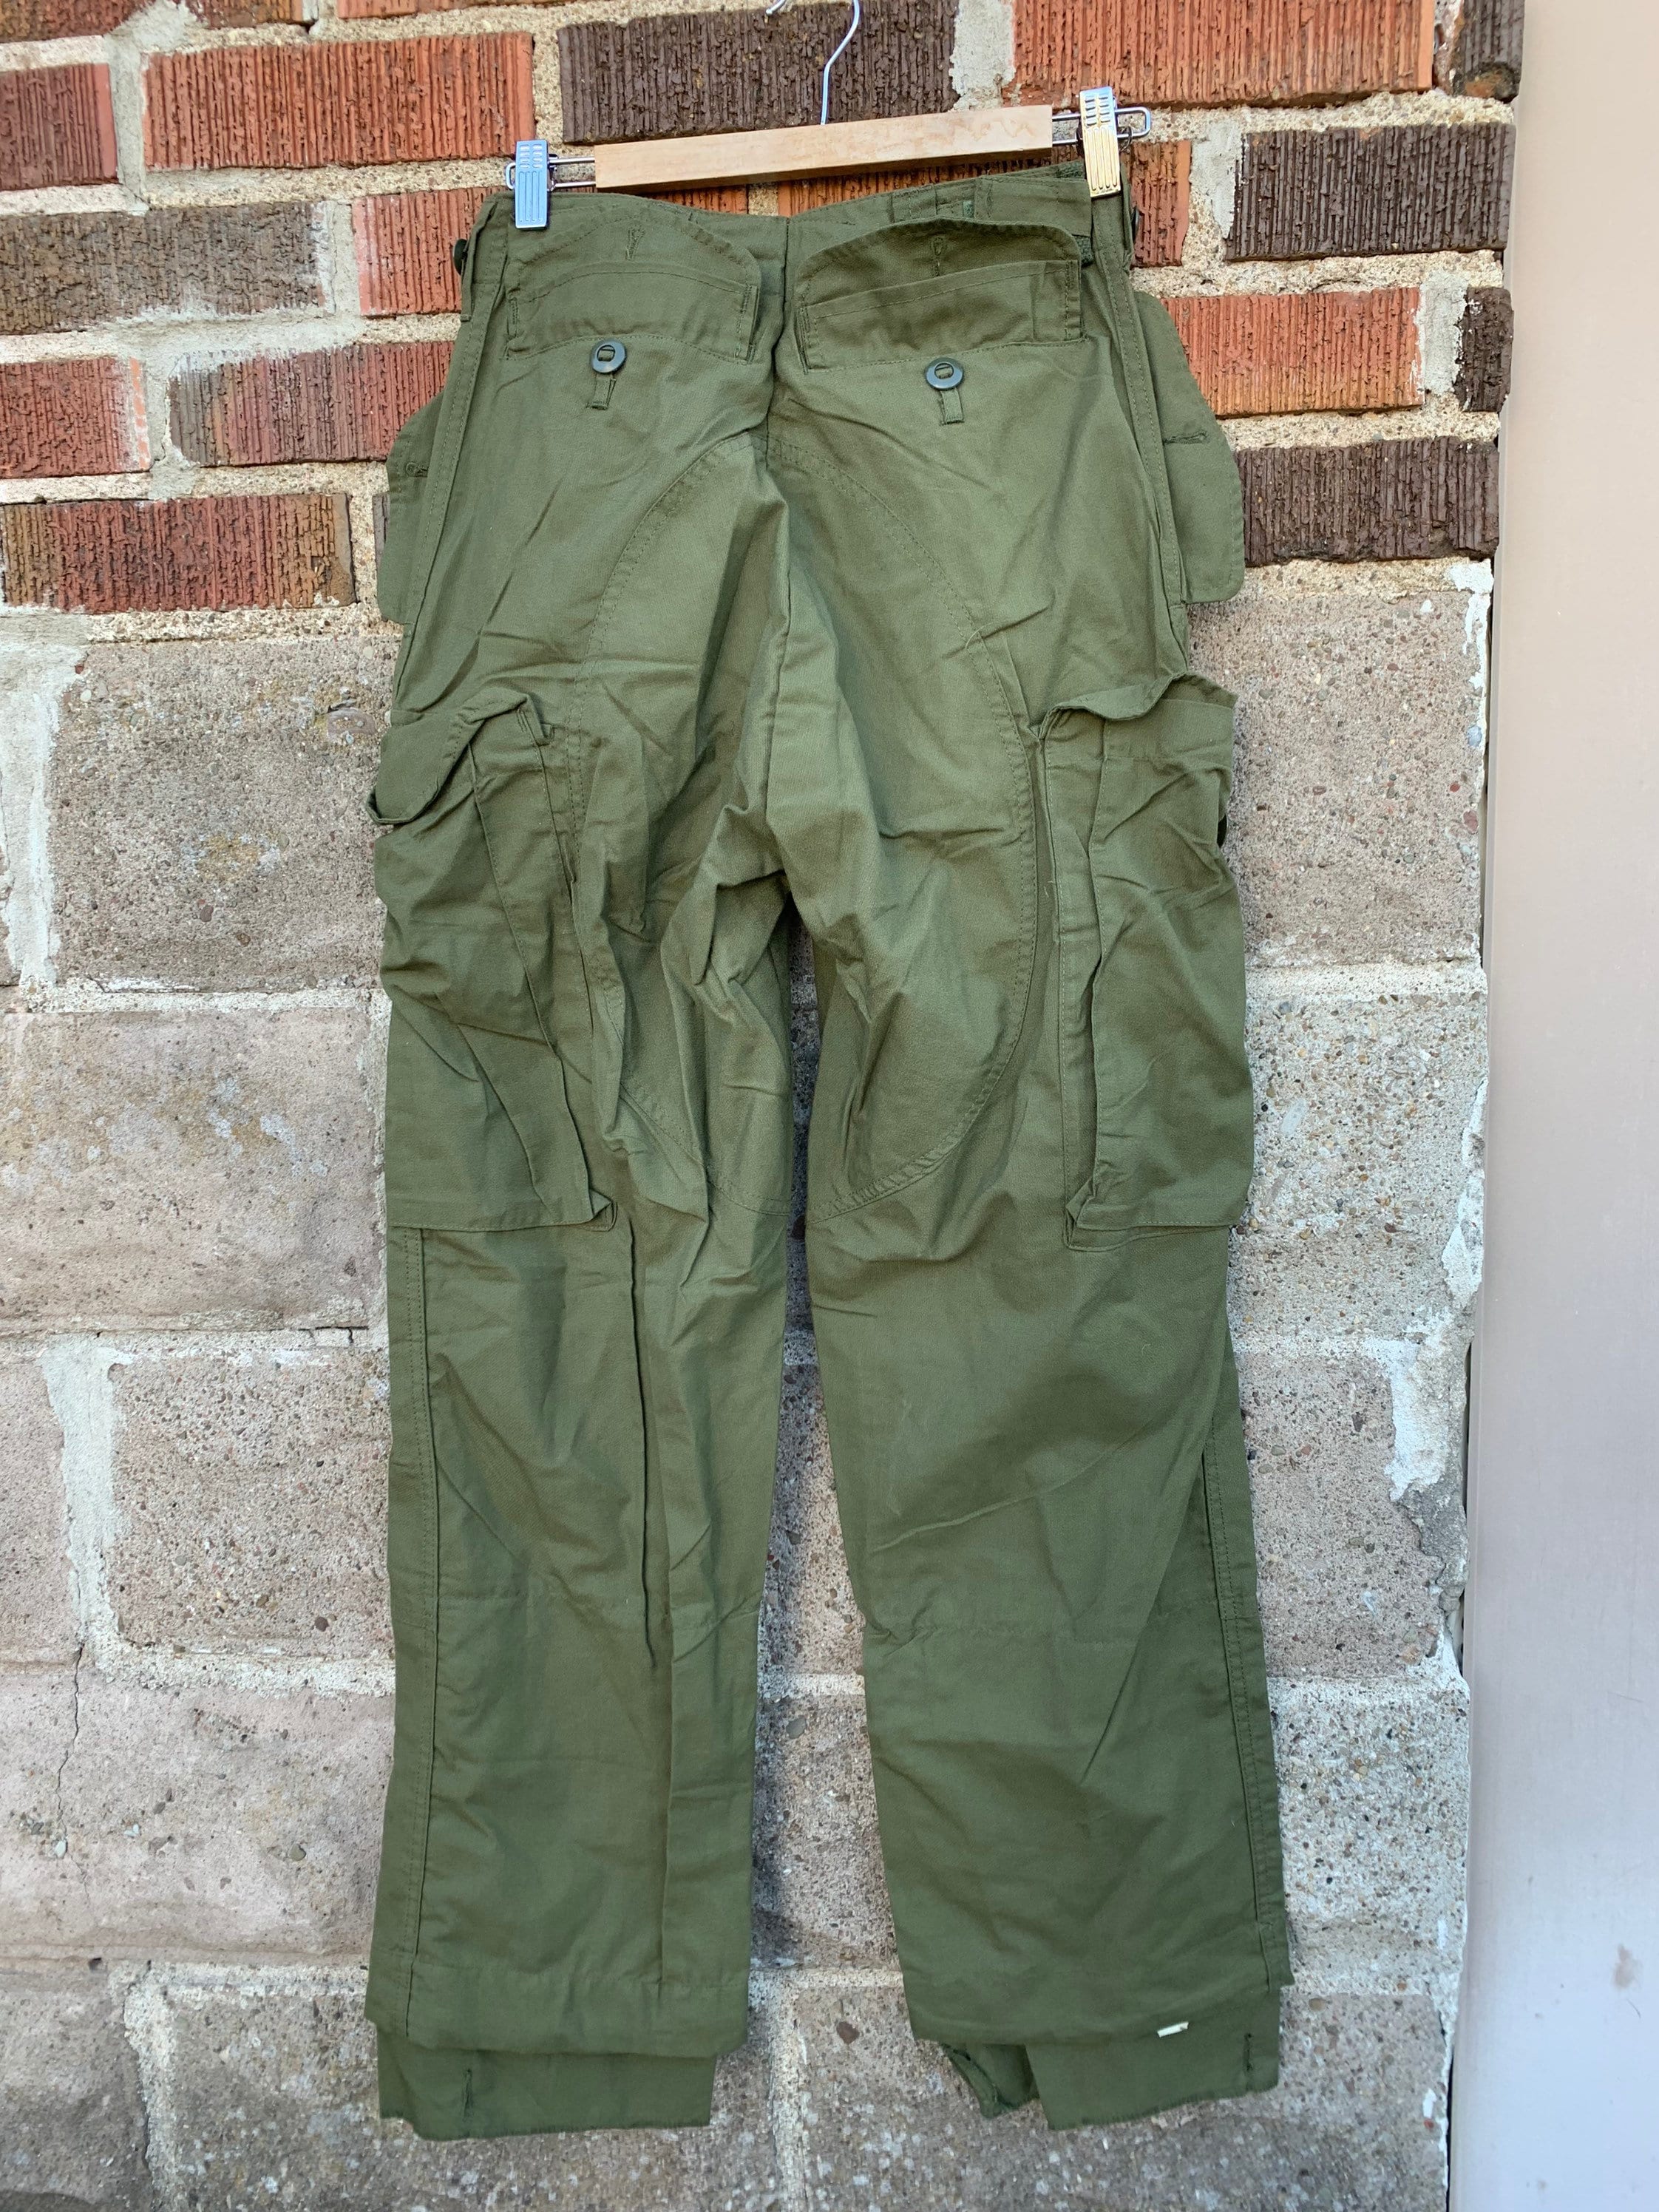 Genuine 1987 Canadian Army Mark III Lightweight Combat Trousers OG107  Fatigue Pants Size Mens X-small Regular 24 to 28 Inch Waist NEW -   Canada